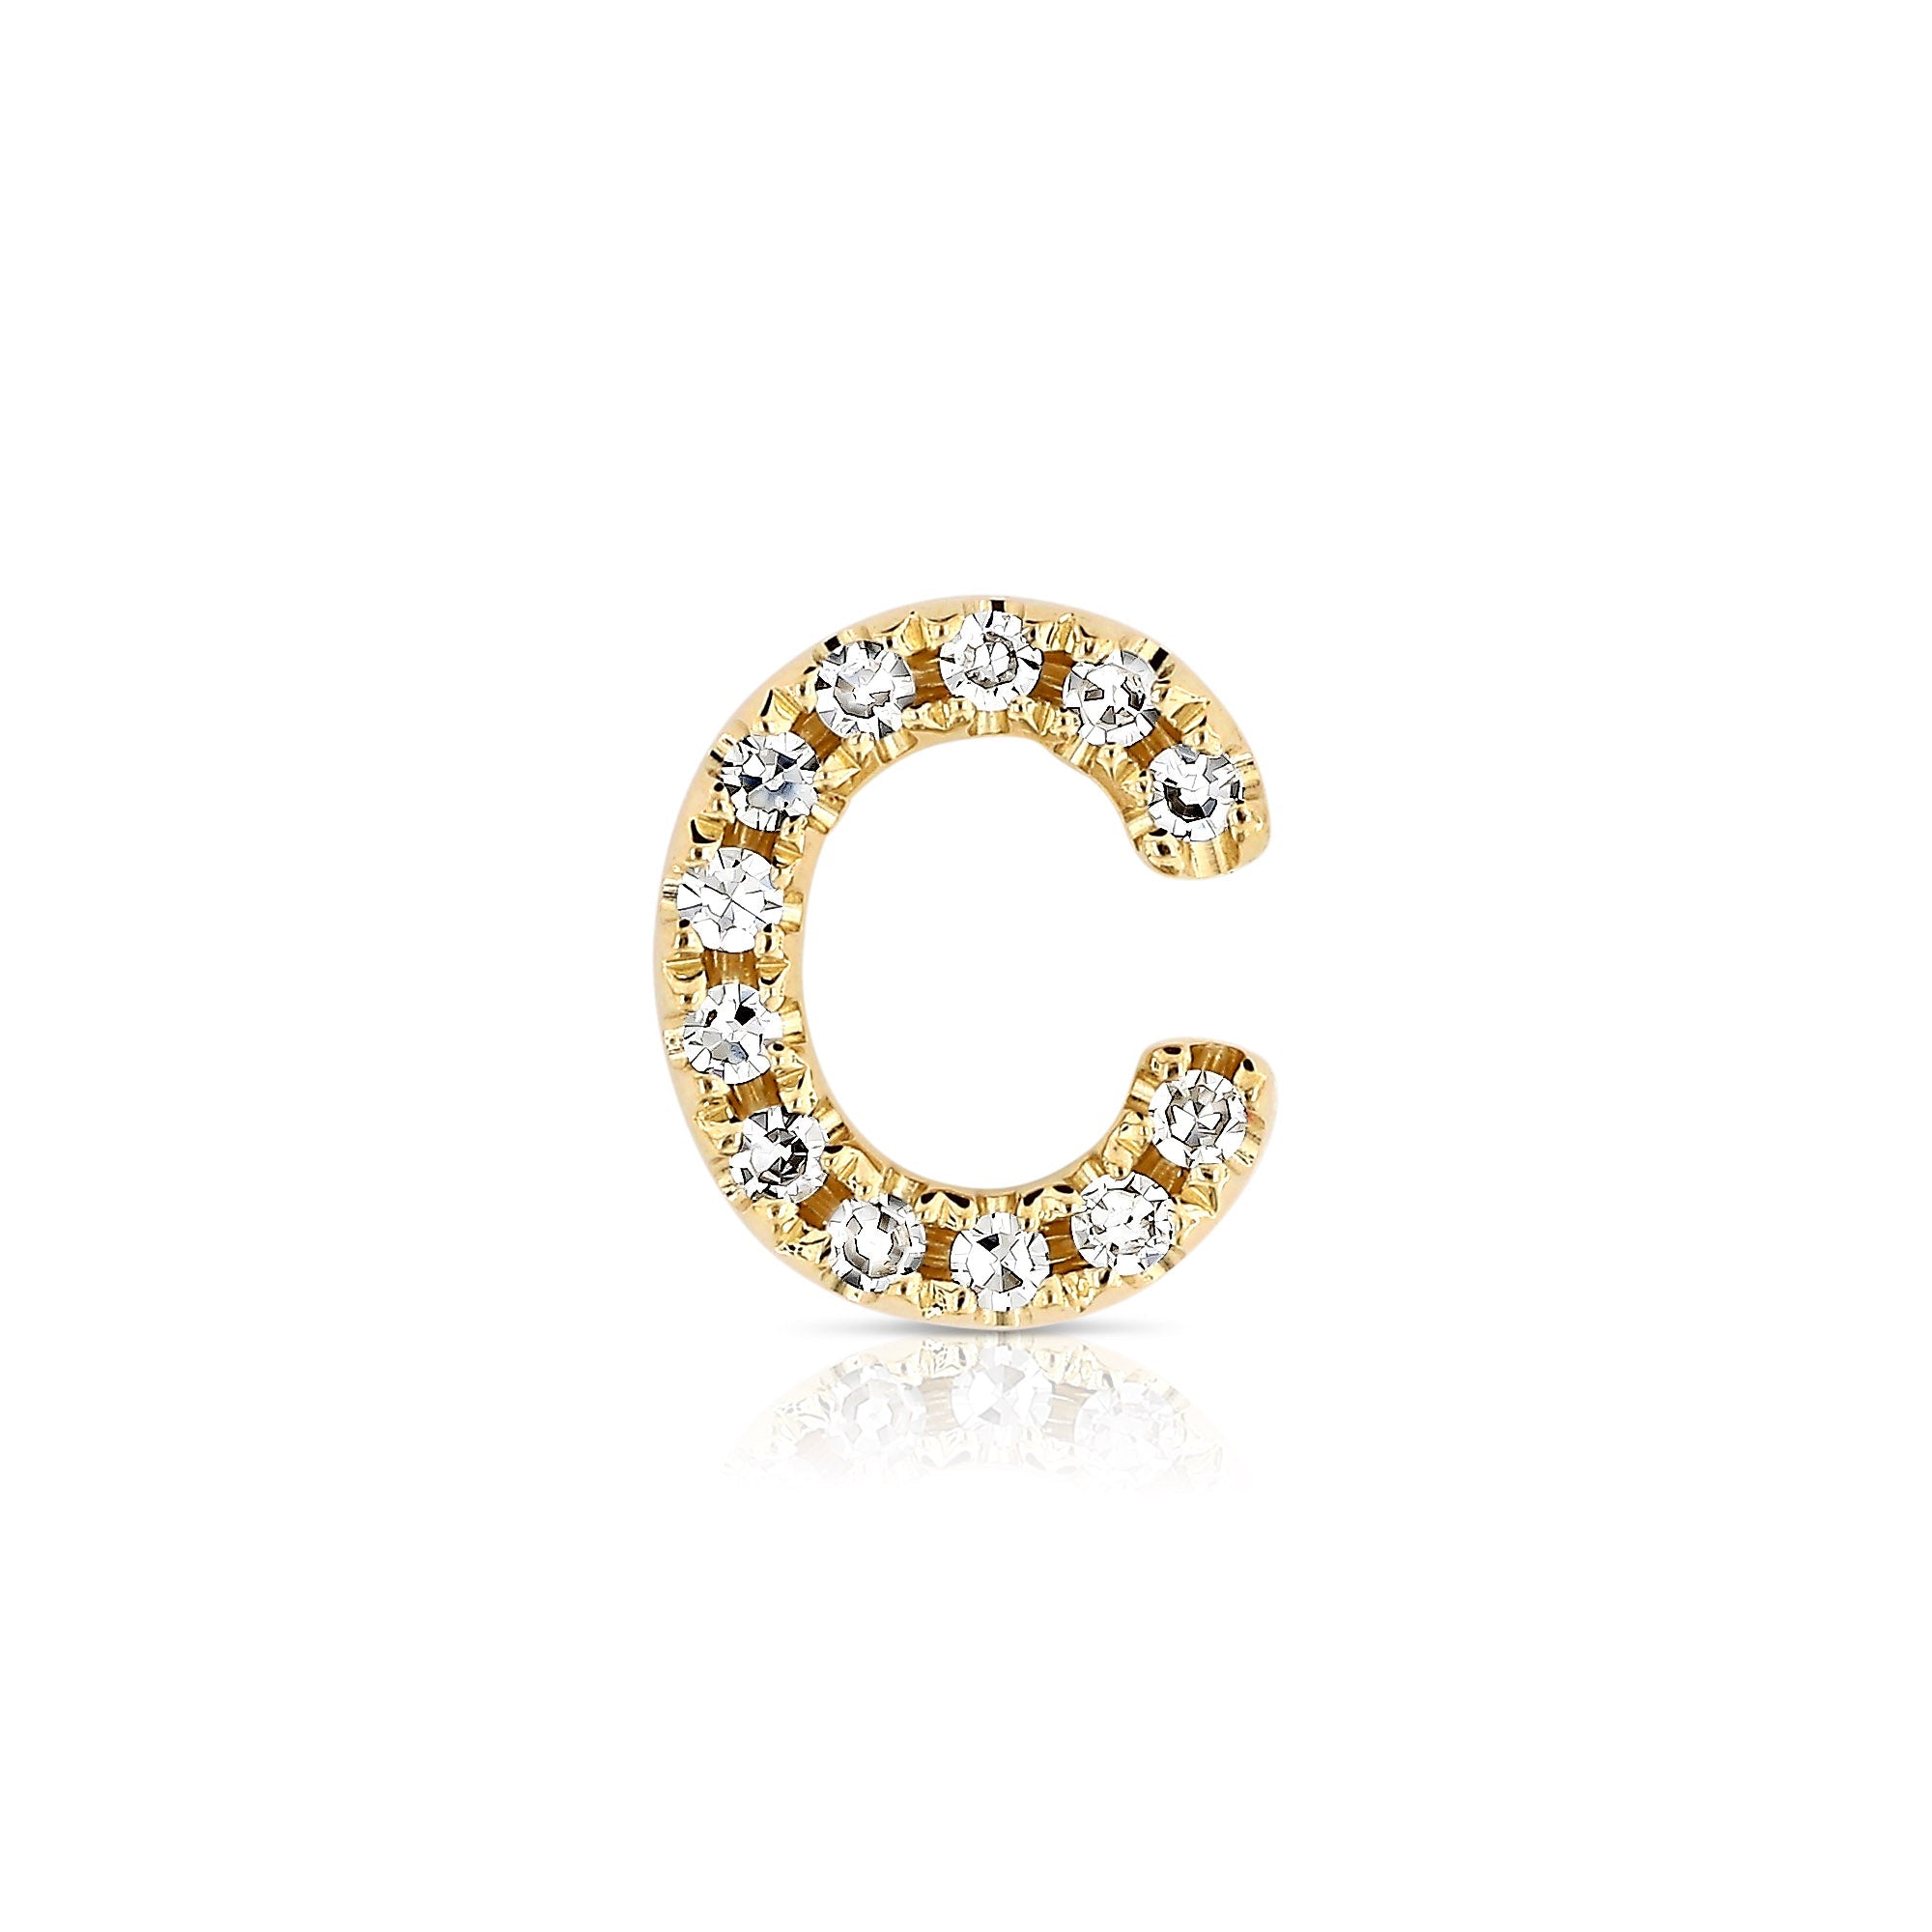 Letter C Charm – Michael and Son's Jewelers